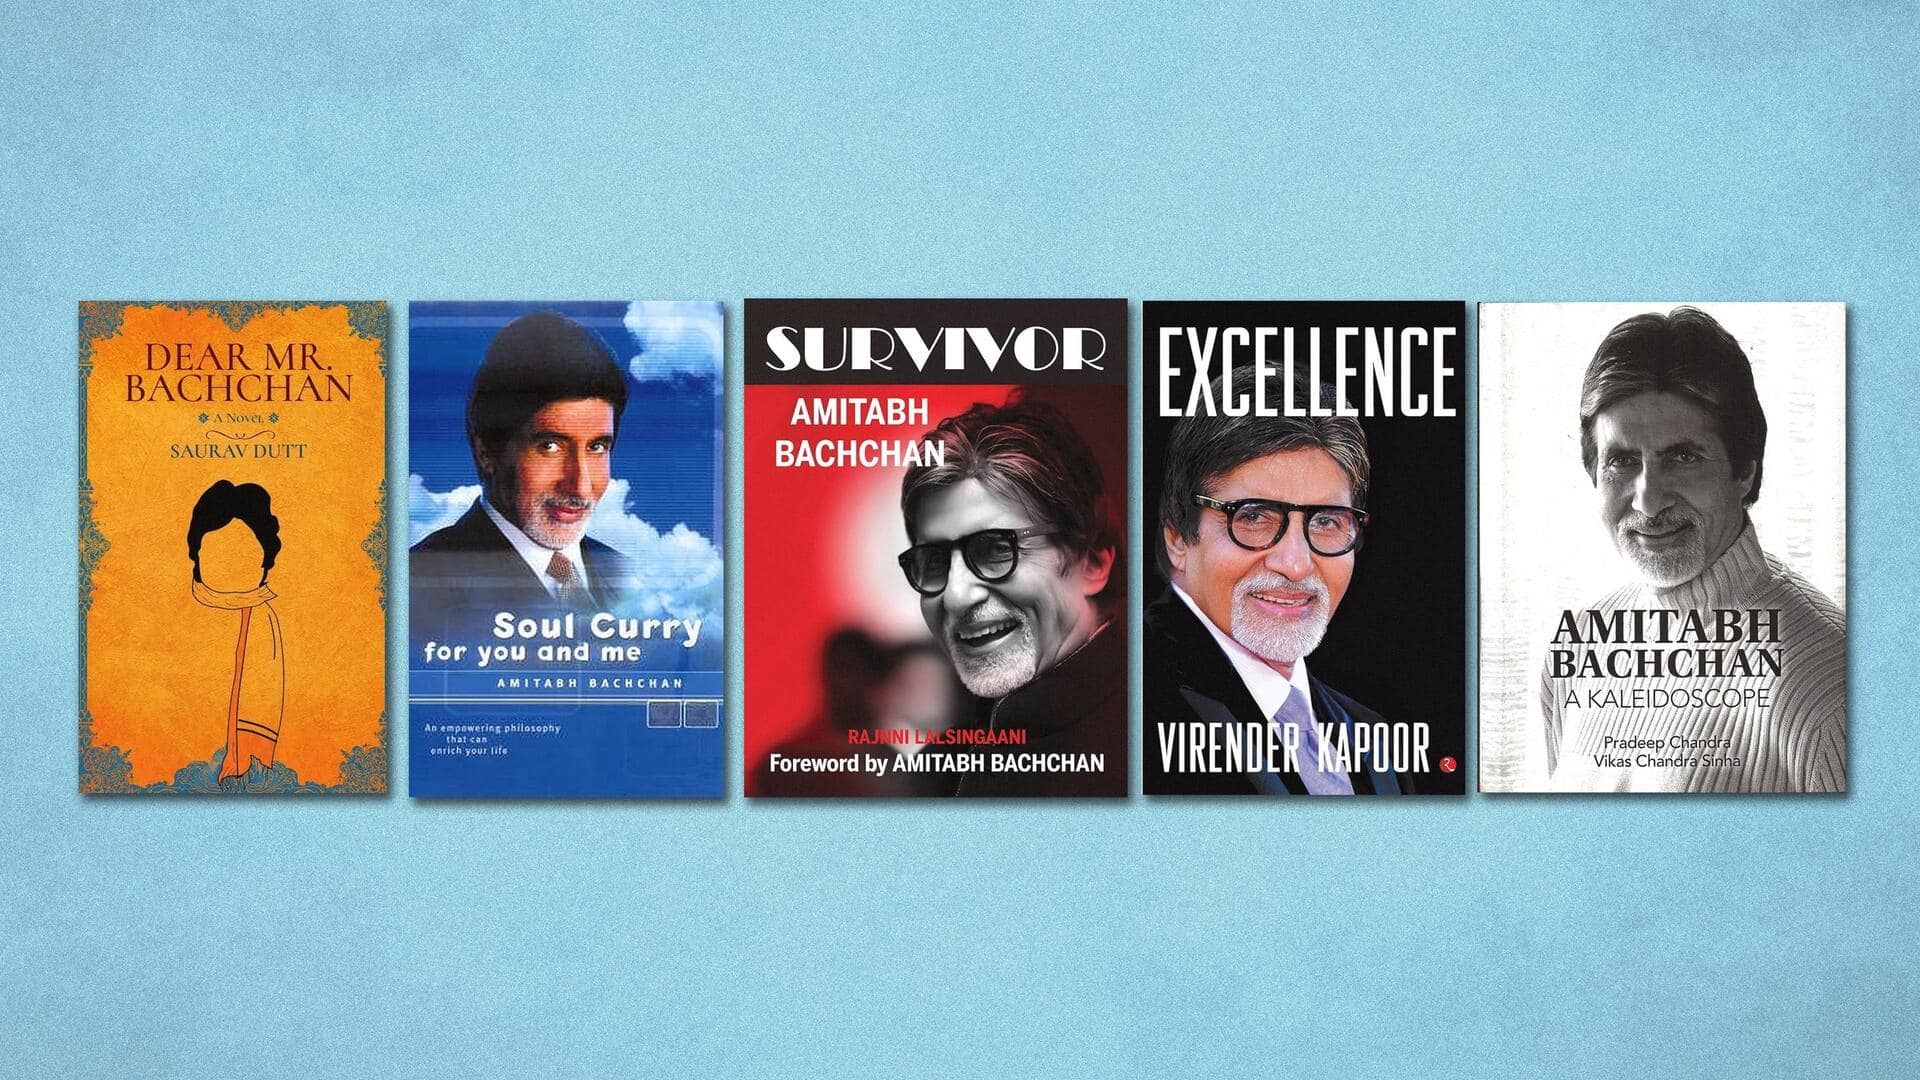 Happy birthday, Amitabh Bachchan! Read books by and about him